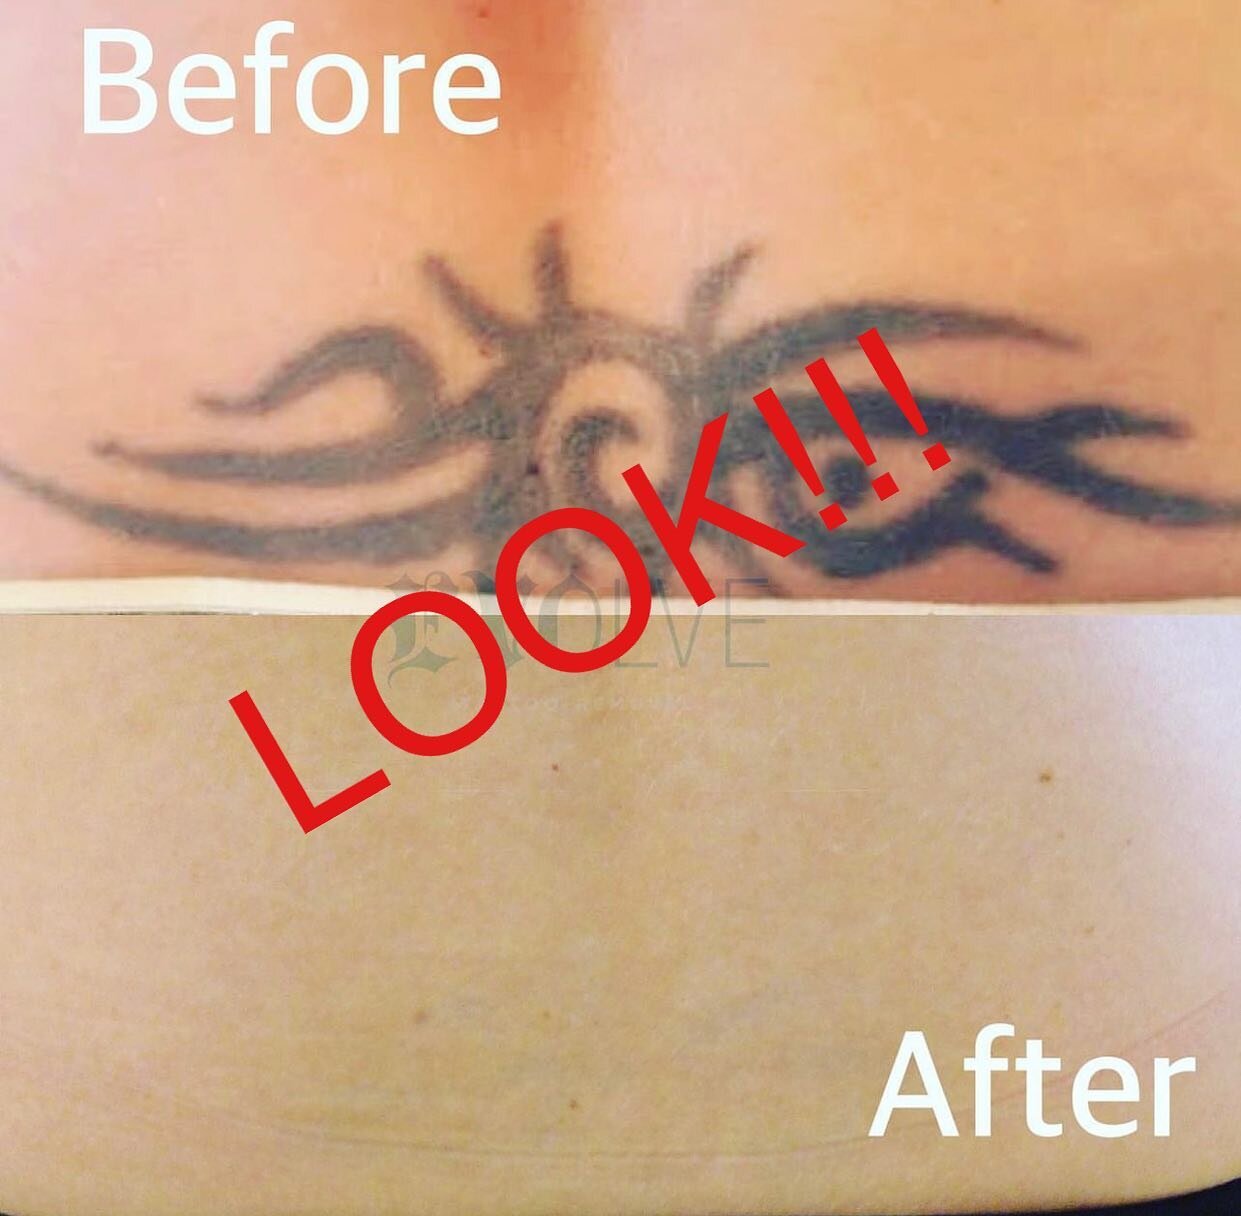 San Diego Laser Tattoo Removal Clinic   REALISTIC PROGRESS PICTURES  5 treatments SO FAR Treatments starting Only 79 Tattoo Removal Guarantee  Free Consultations Quanta Discovery Pico Laser Technology 11 years  Experience